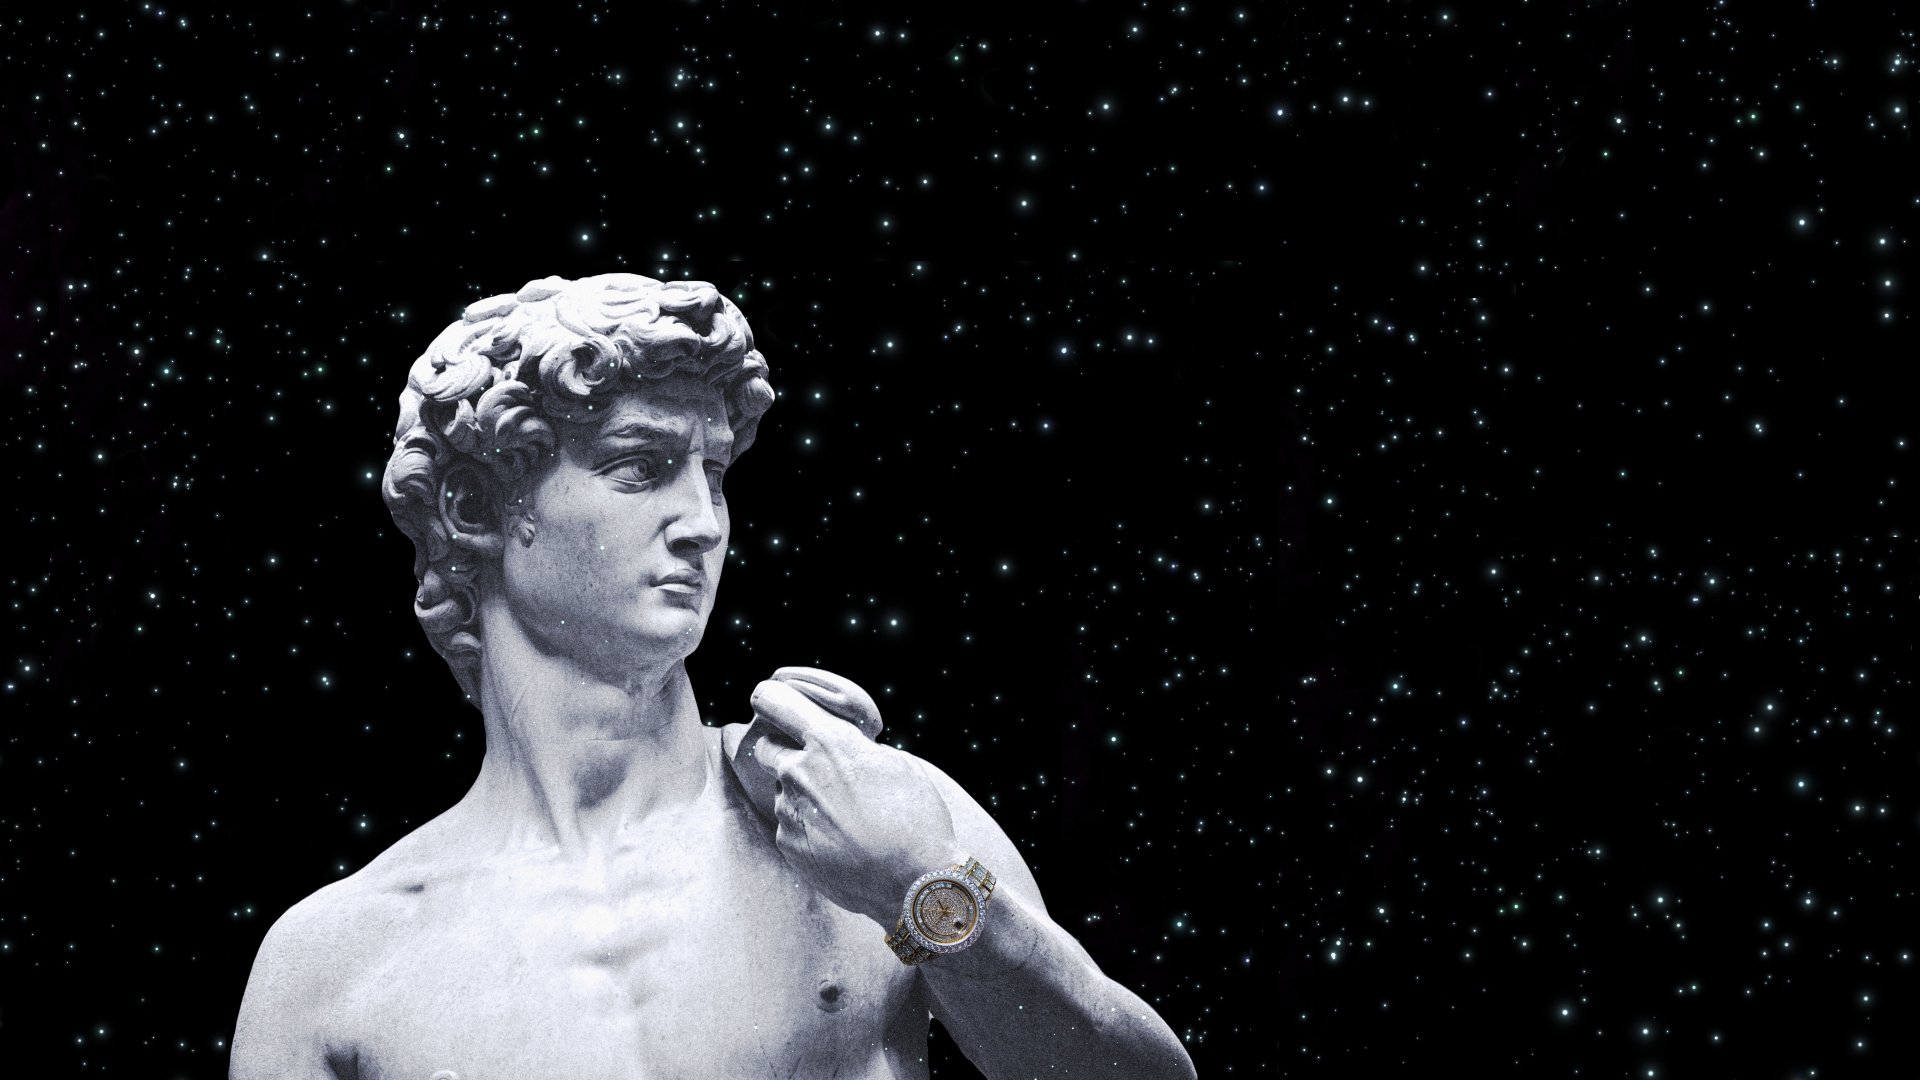 Statue Of David Marble Rolex Gold Watch Space Stars 1920x1080